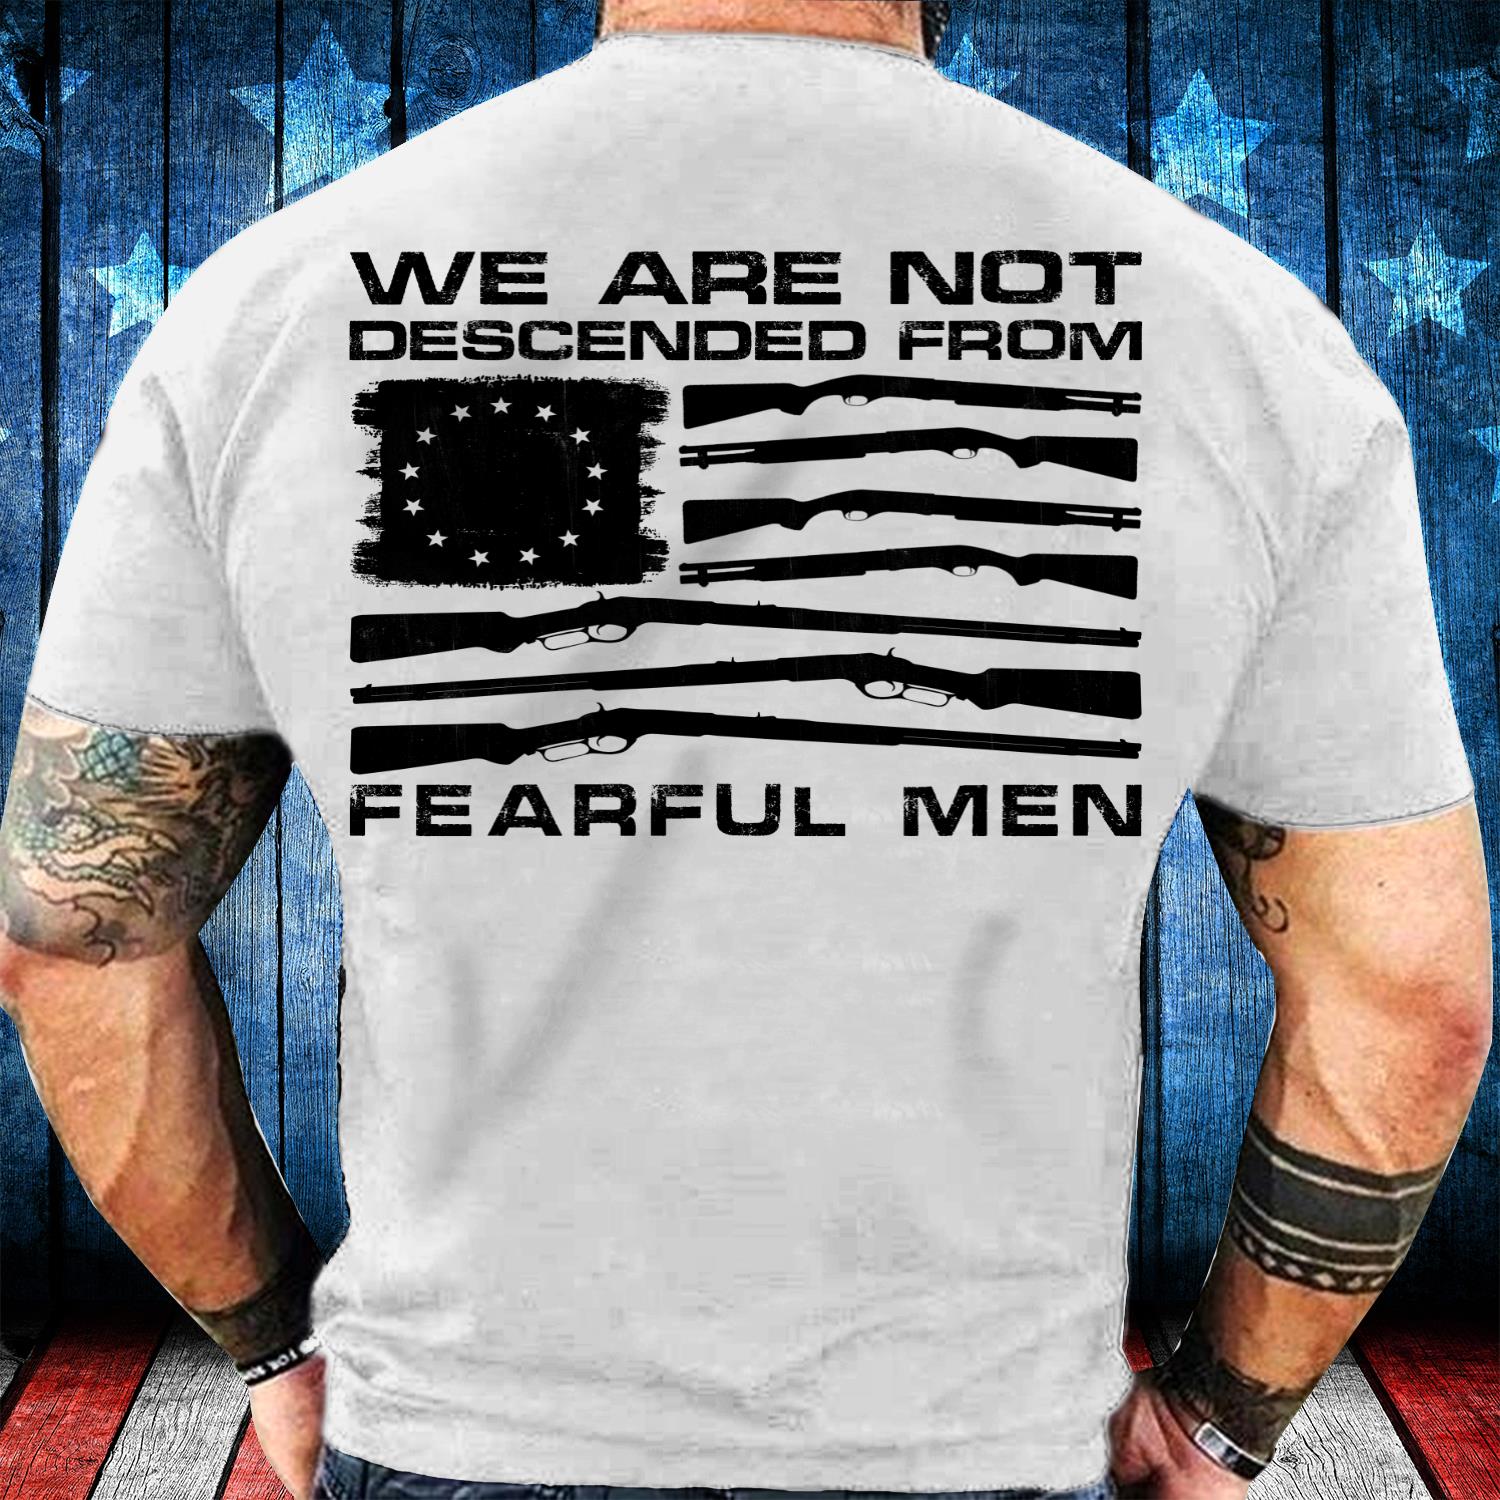 We Are Not Descended From Fearful Men T-Shirt